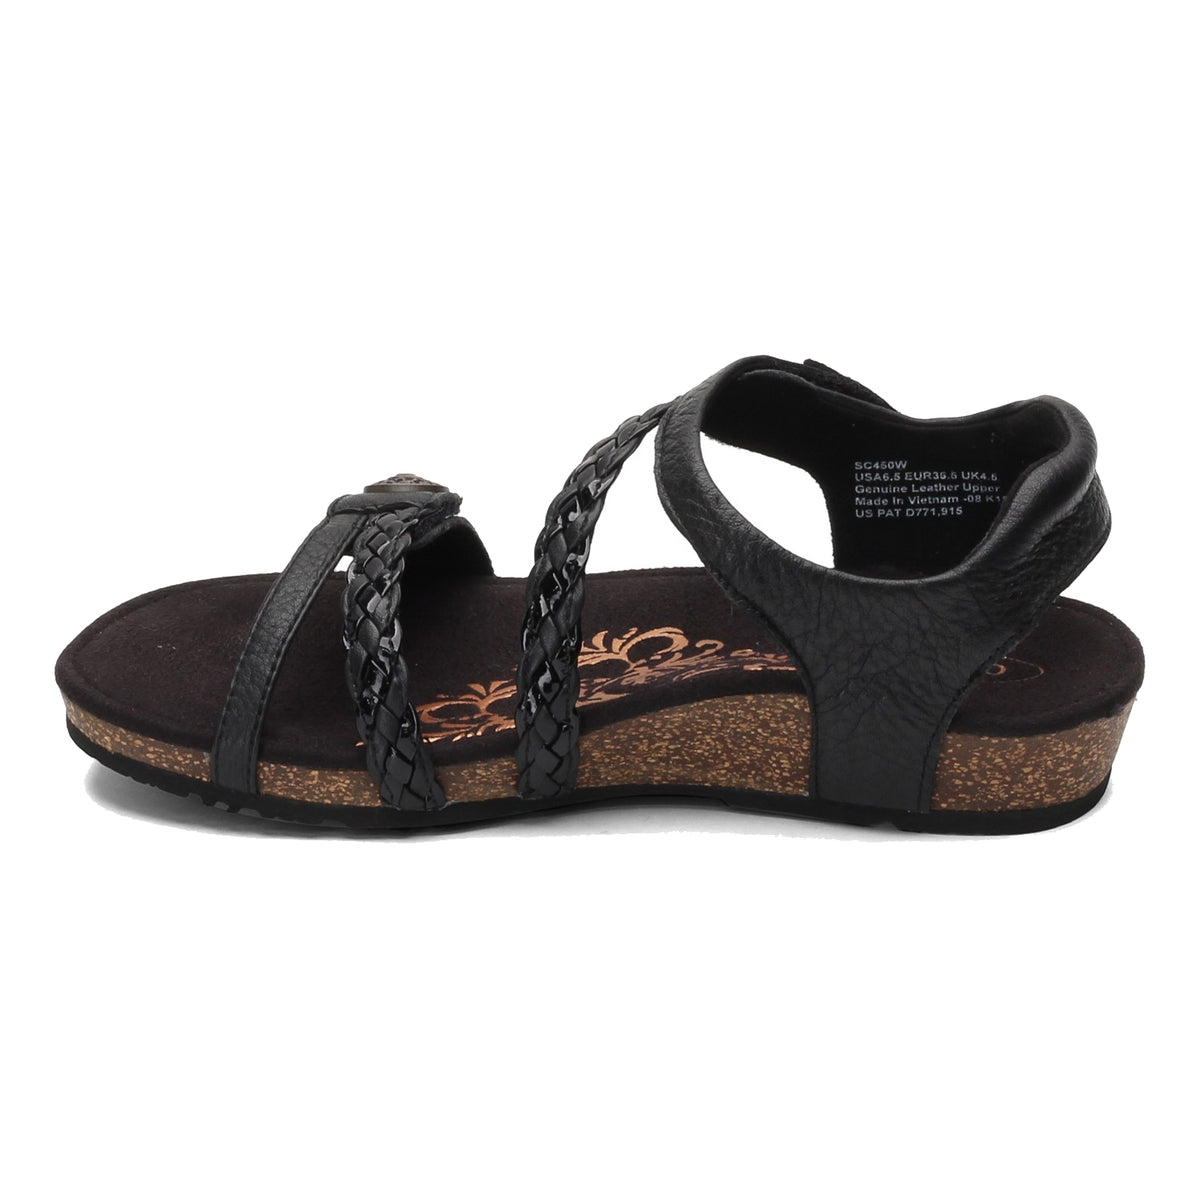 A black Aetrex Jillian Black Women’s Quarter-Strap Sandal with arch support, featuring a braided strap and cork sole, isolated on a white background.